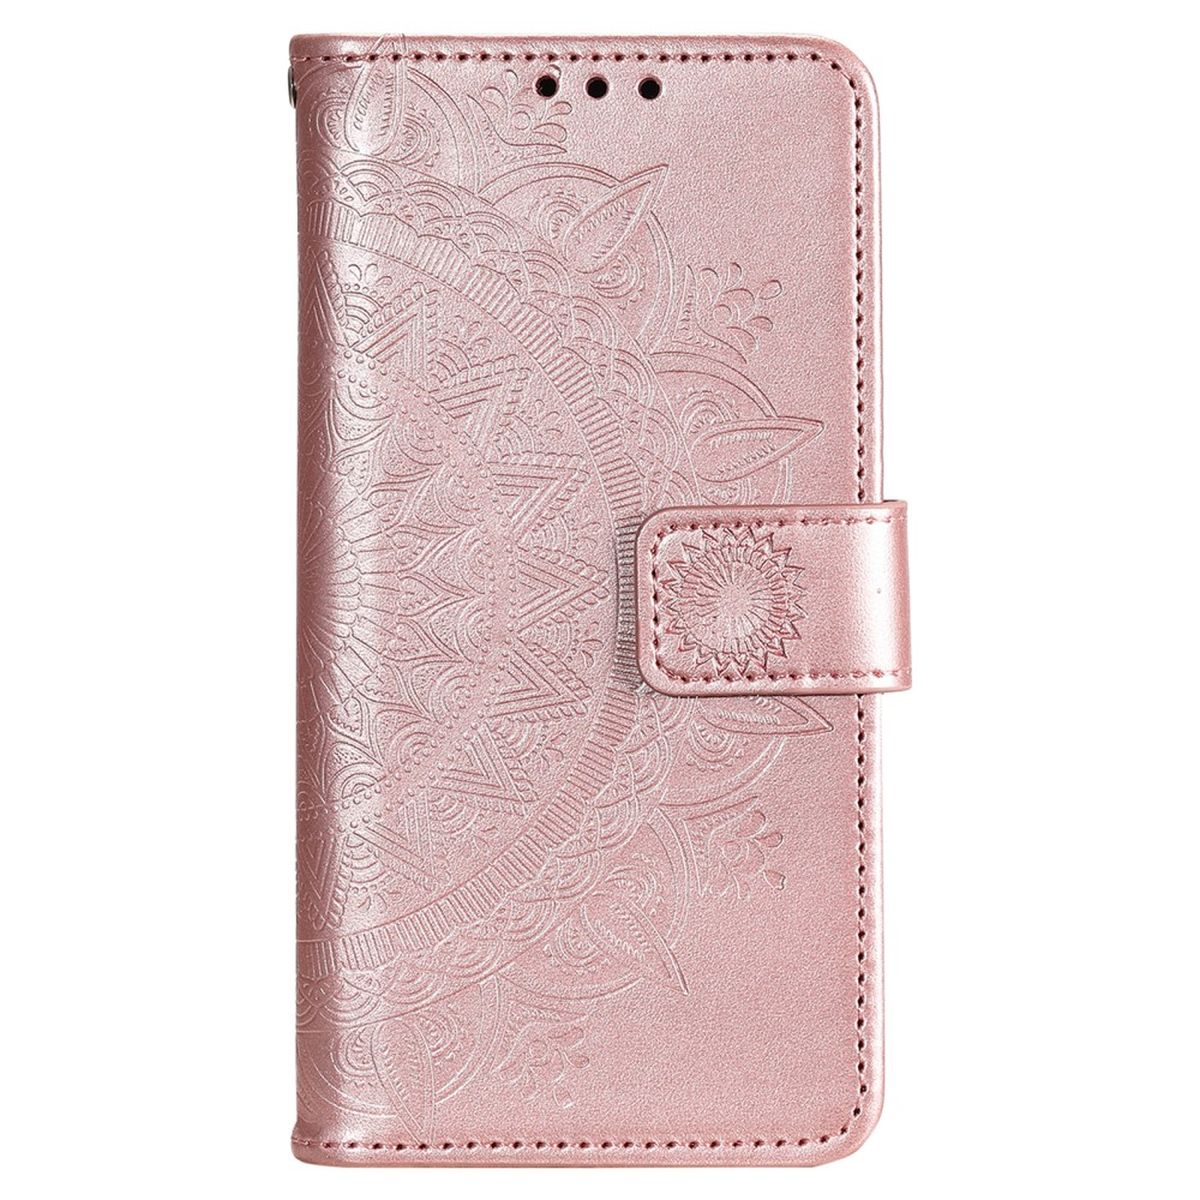 COVERKINGZ Klapphülle mit Mandala Muster, Rosegold Galaxy 5G, S22 Samsung, Bookcover